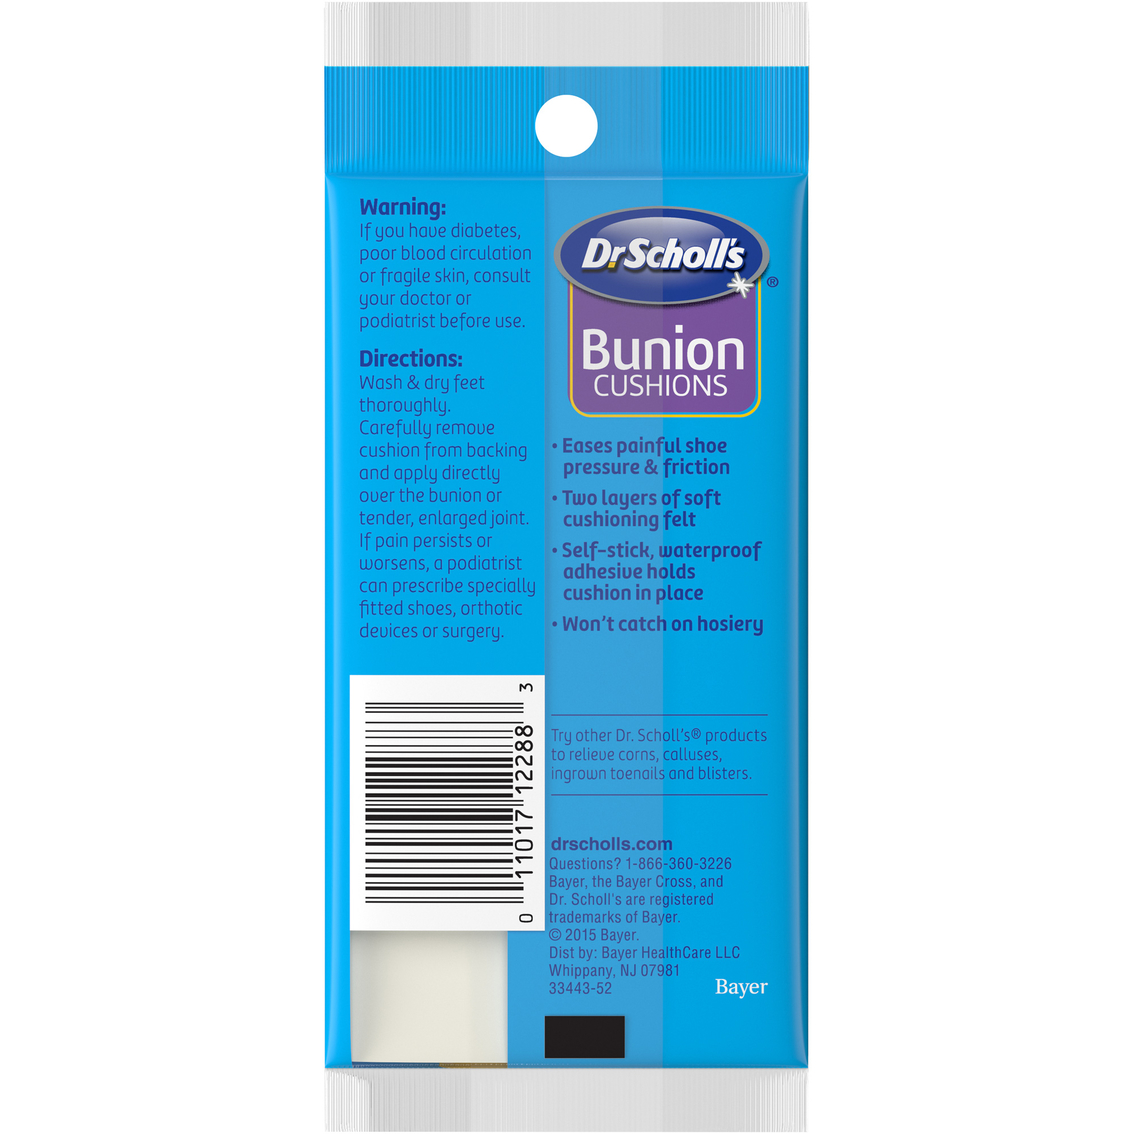 Dr. Scholl's Bunion Cushions, 6 ct. - Image 2 of 2